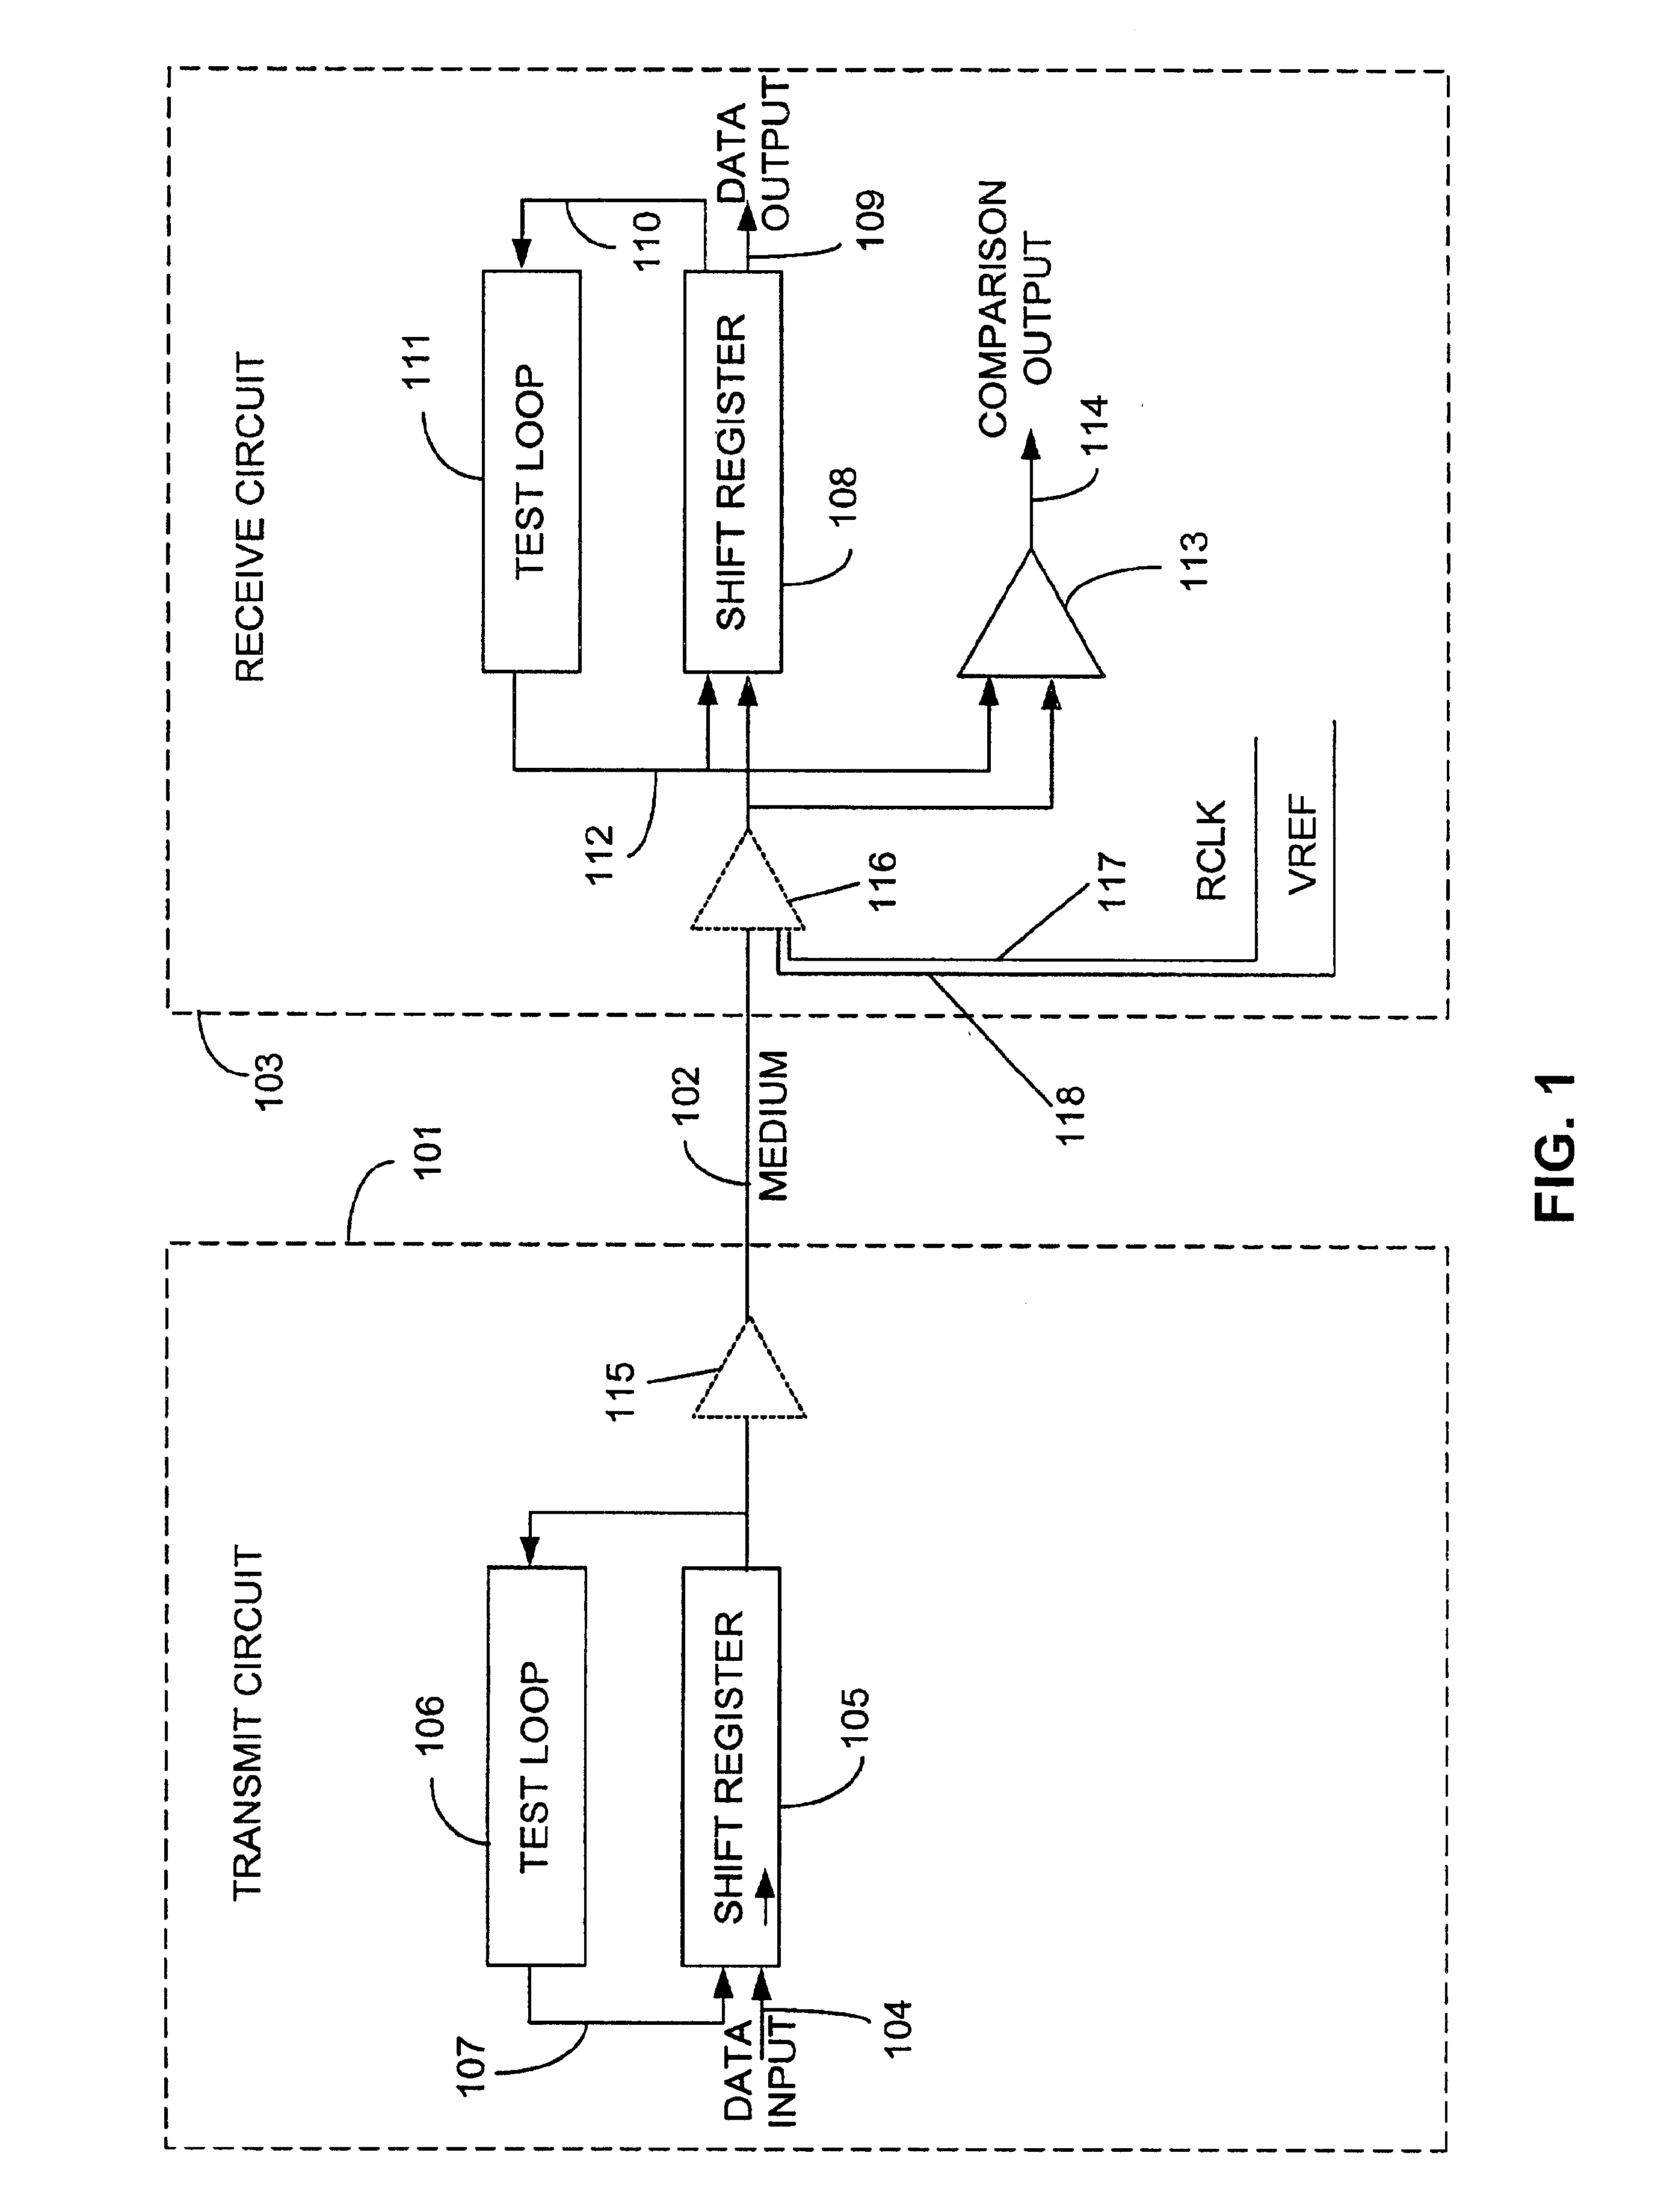 Method and apparatus for evaluating and calibrating a signaling system